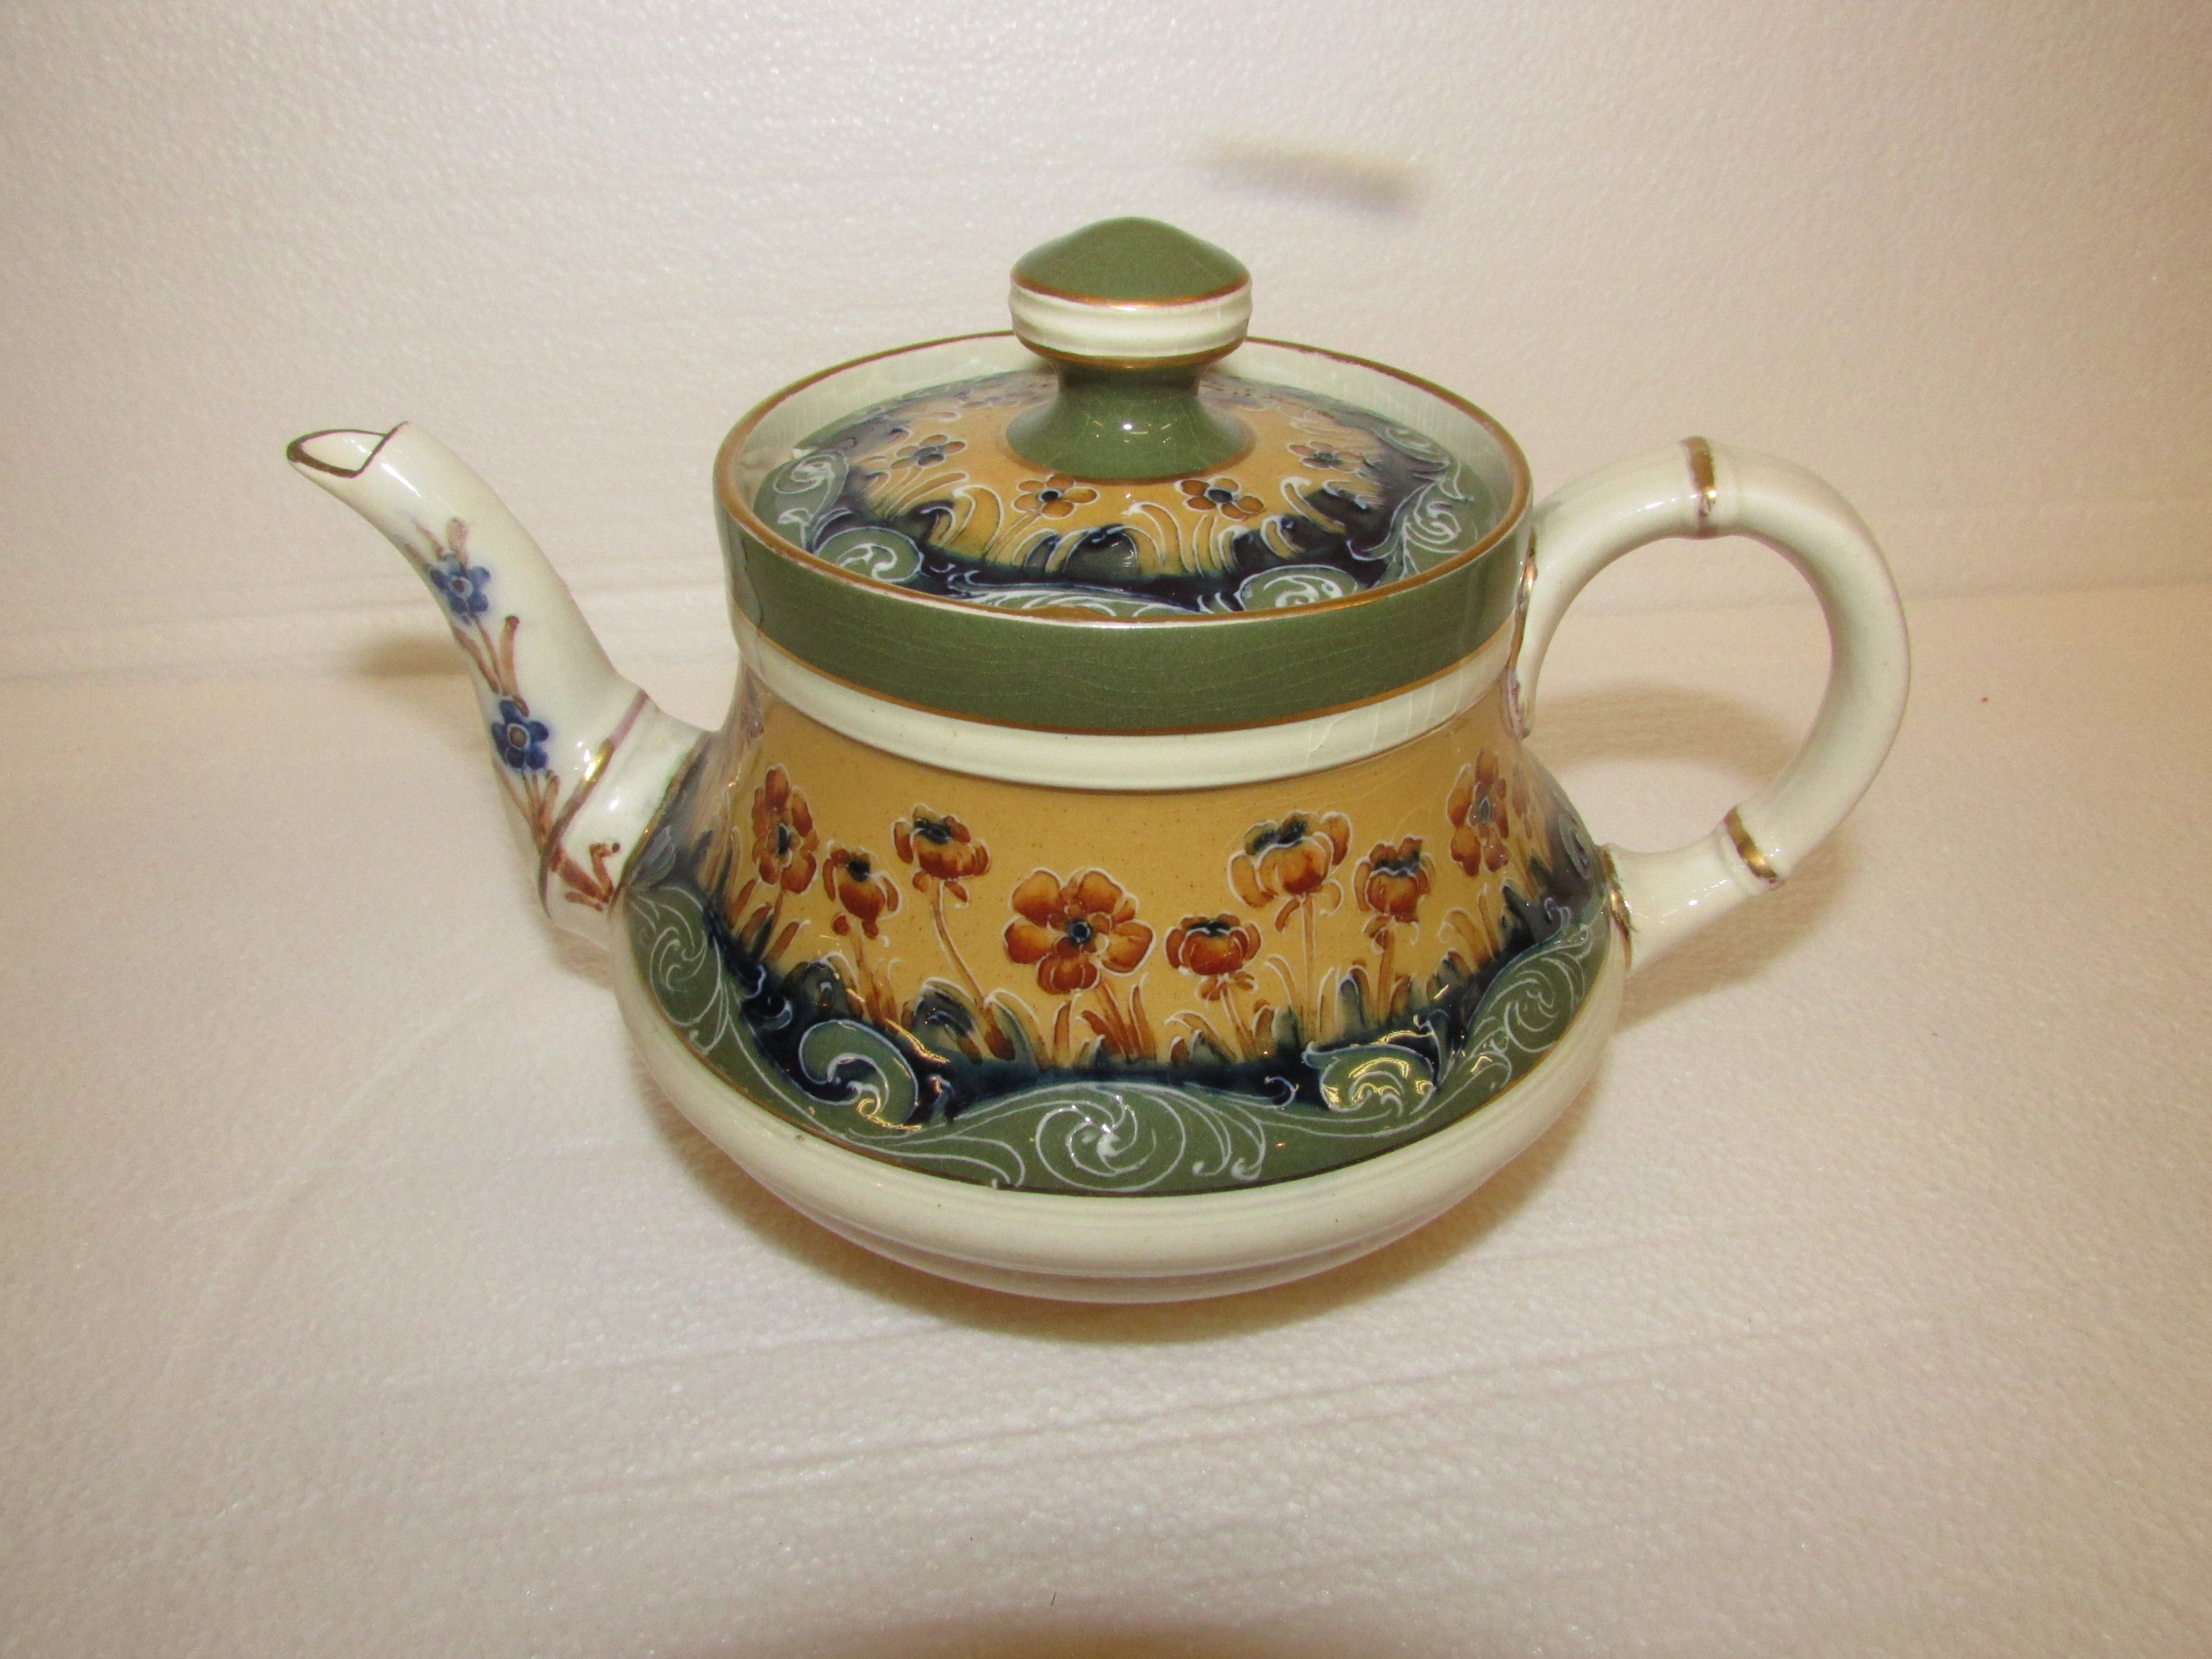 Transitional Macintyre teapot reg no. 401753 decorated with cream and green bands of floral and